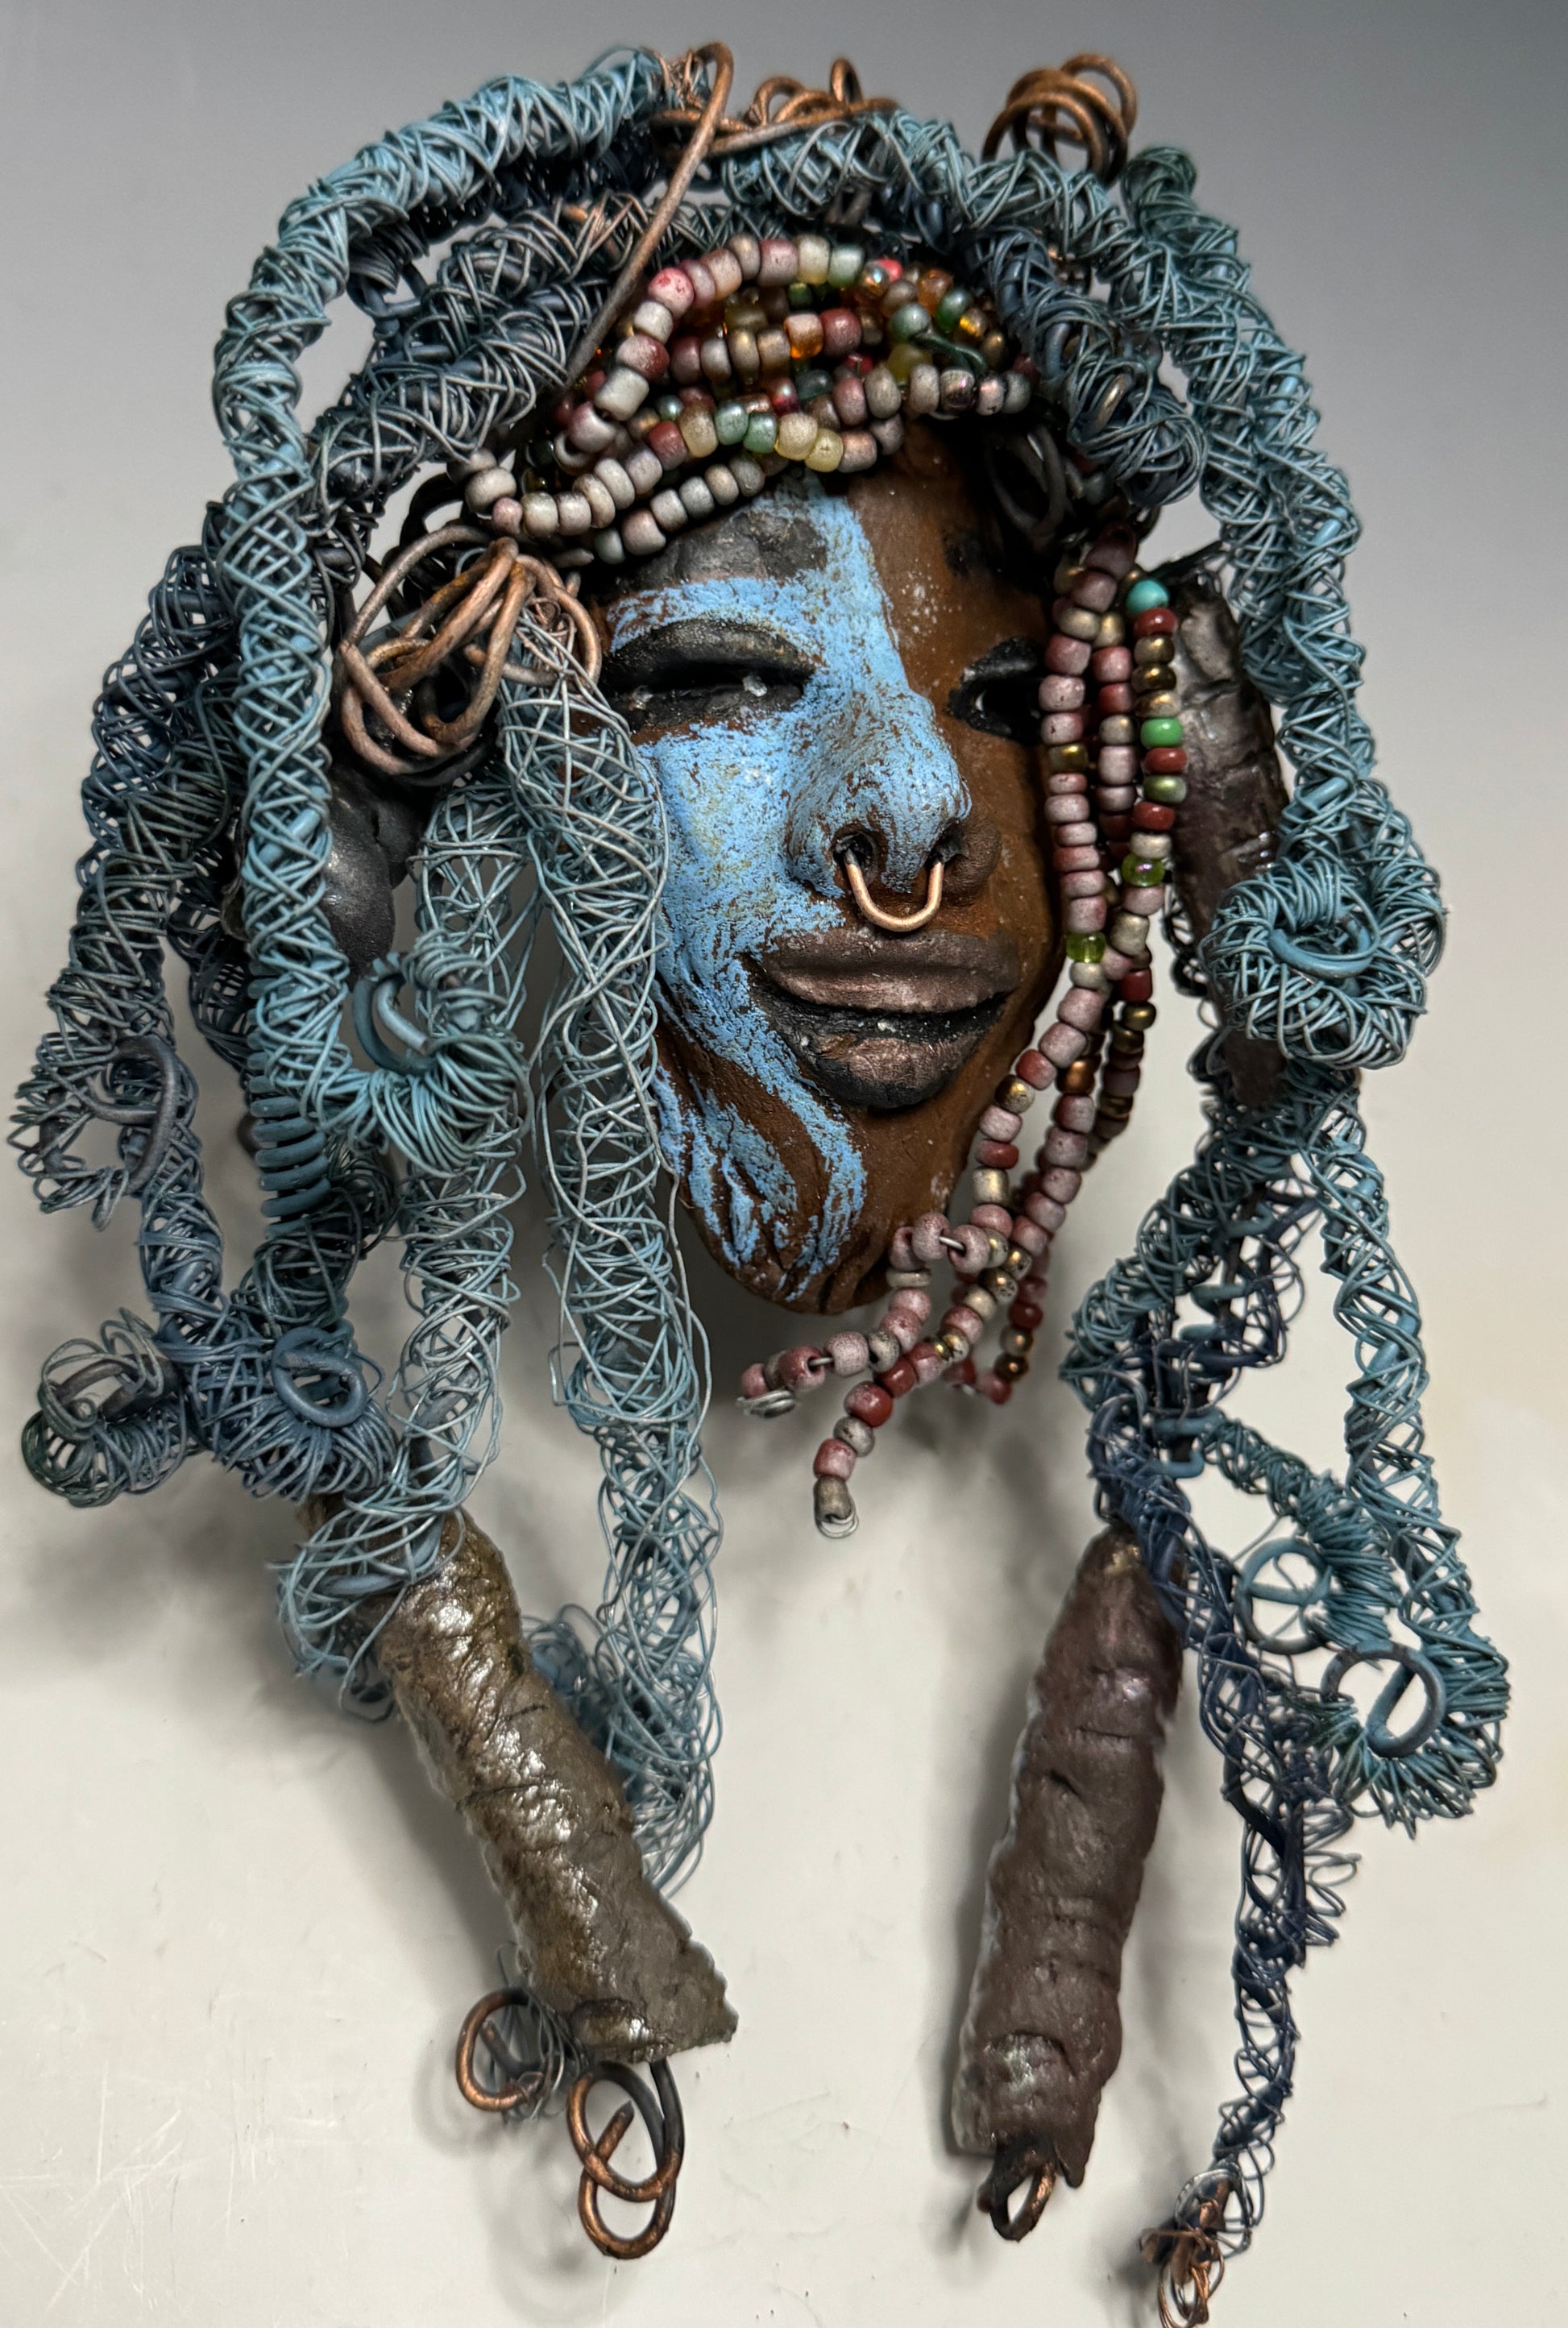 Zola is a mesmerizing raku mask with a captivating tribal face. She measures approximately 5 x 9" and weighs 7 oz. The mask is further decorated with blue hair and a copper nose ring.